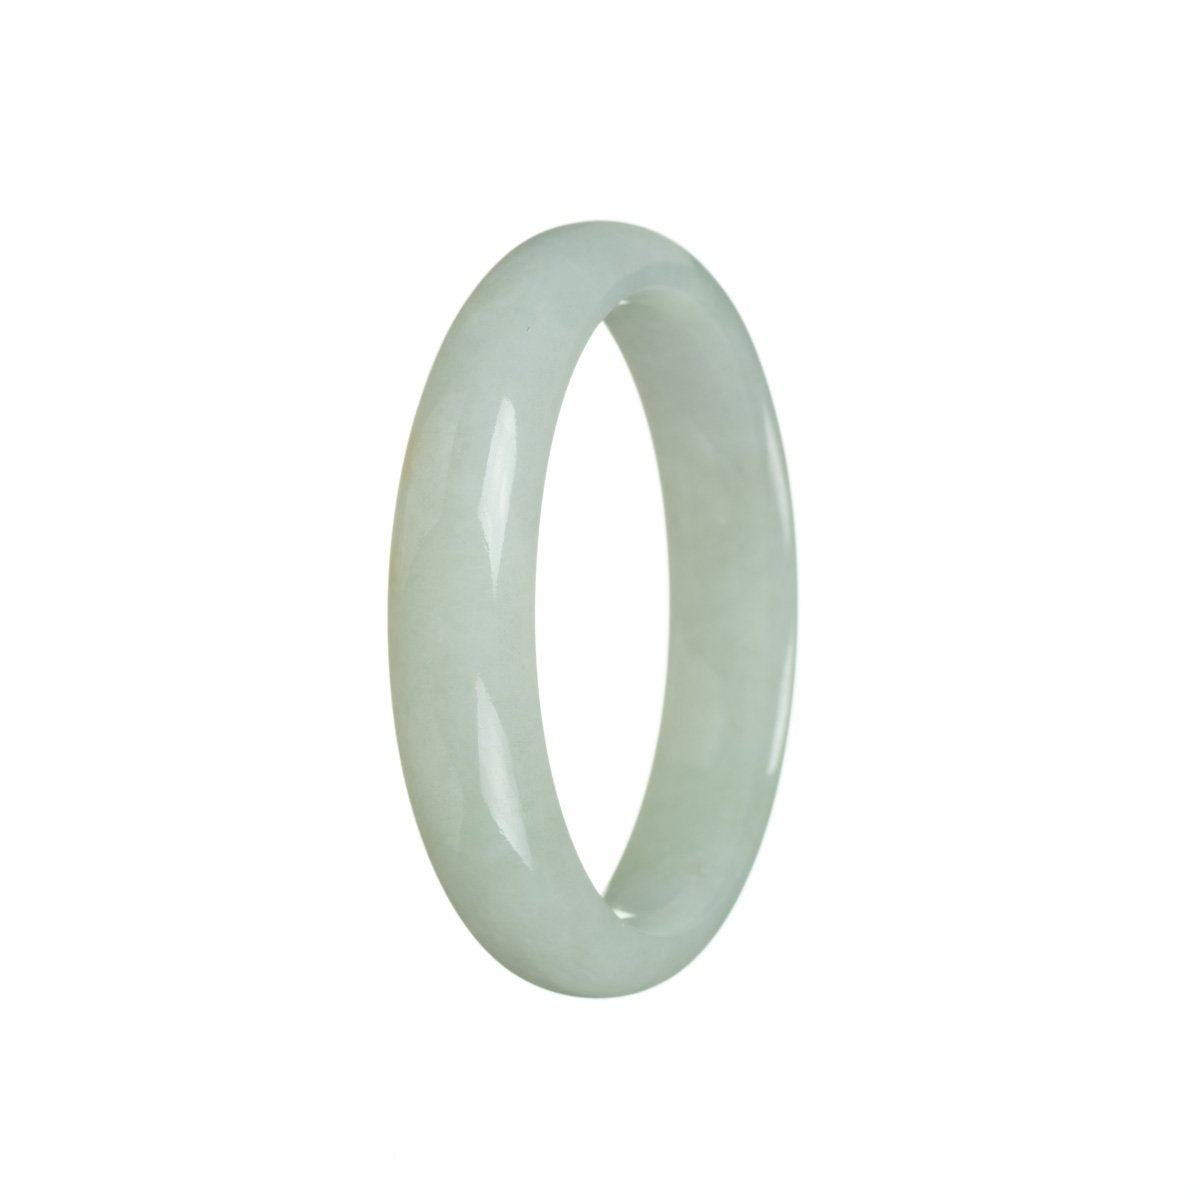 A close-up image of a pale green Burma jade bracelet, certified as Type A. The bracelet is in the shape of a half moon and measures 56mm in size. The bracelet is made by MAYS GEMS.